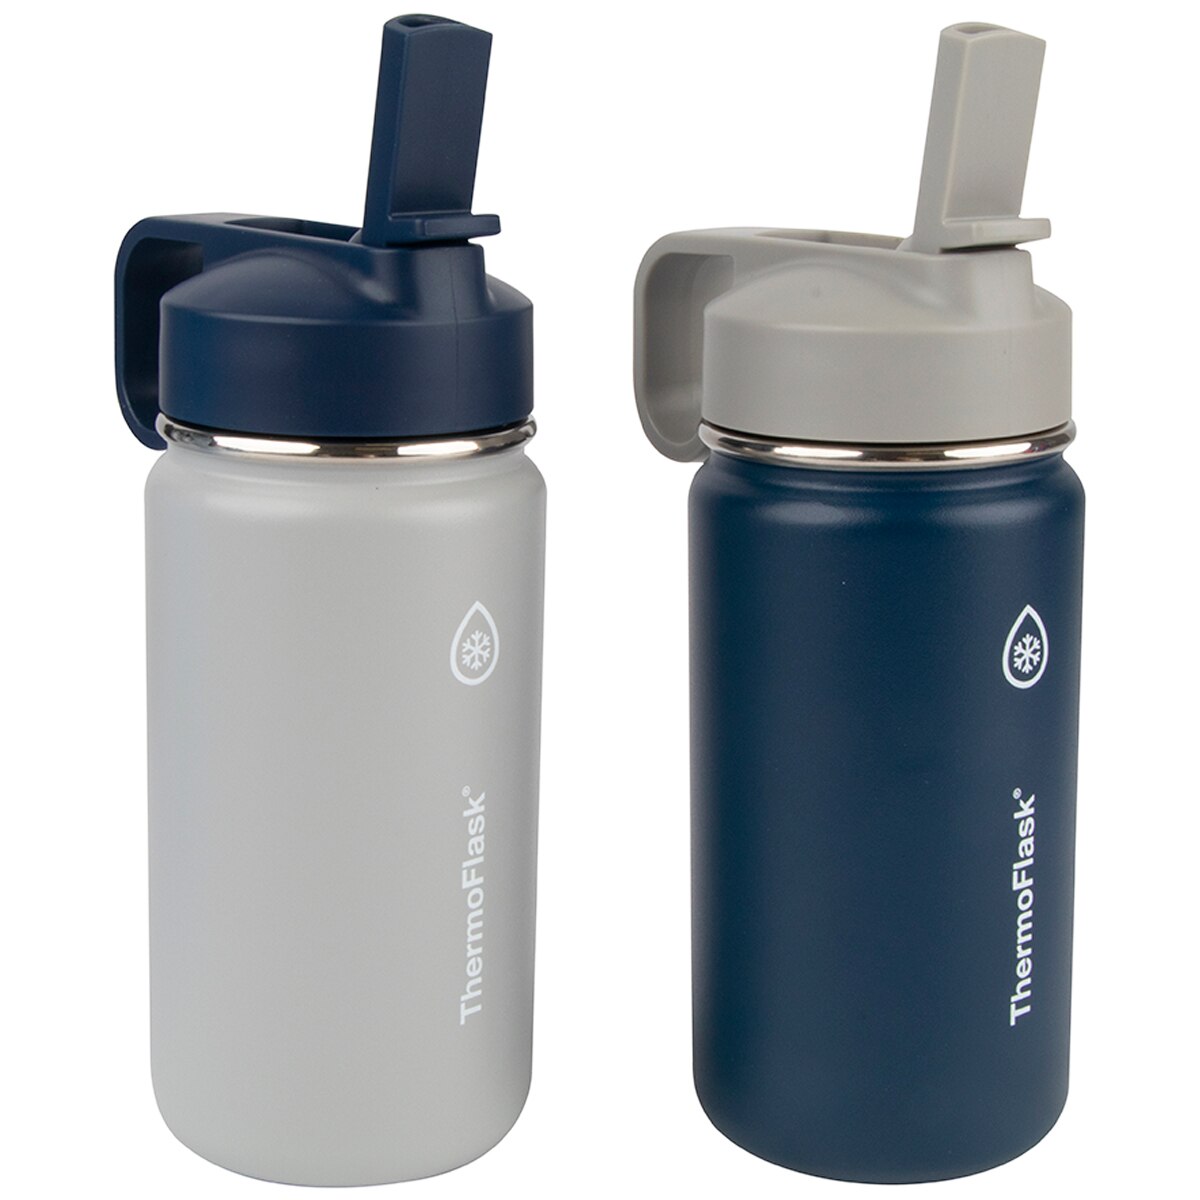 Thermoflask Kids Stainless Steel Insulated Bottle 2 pack - Grey/Navy